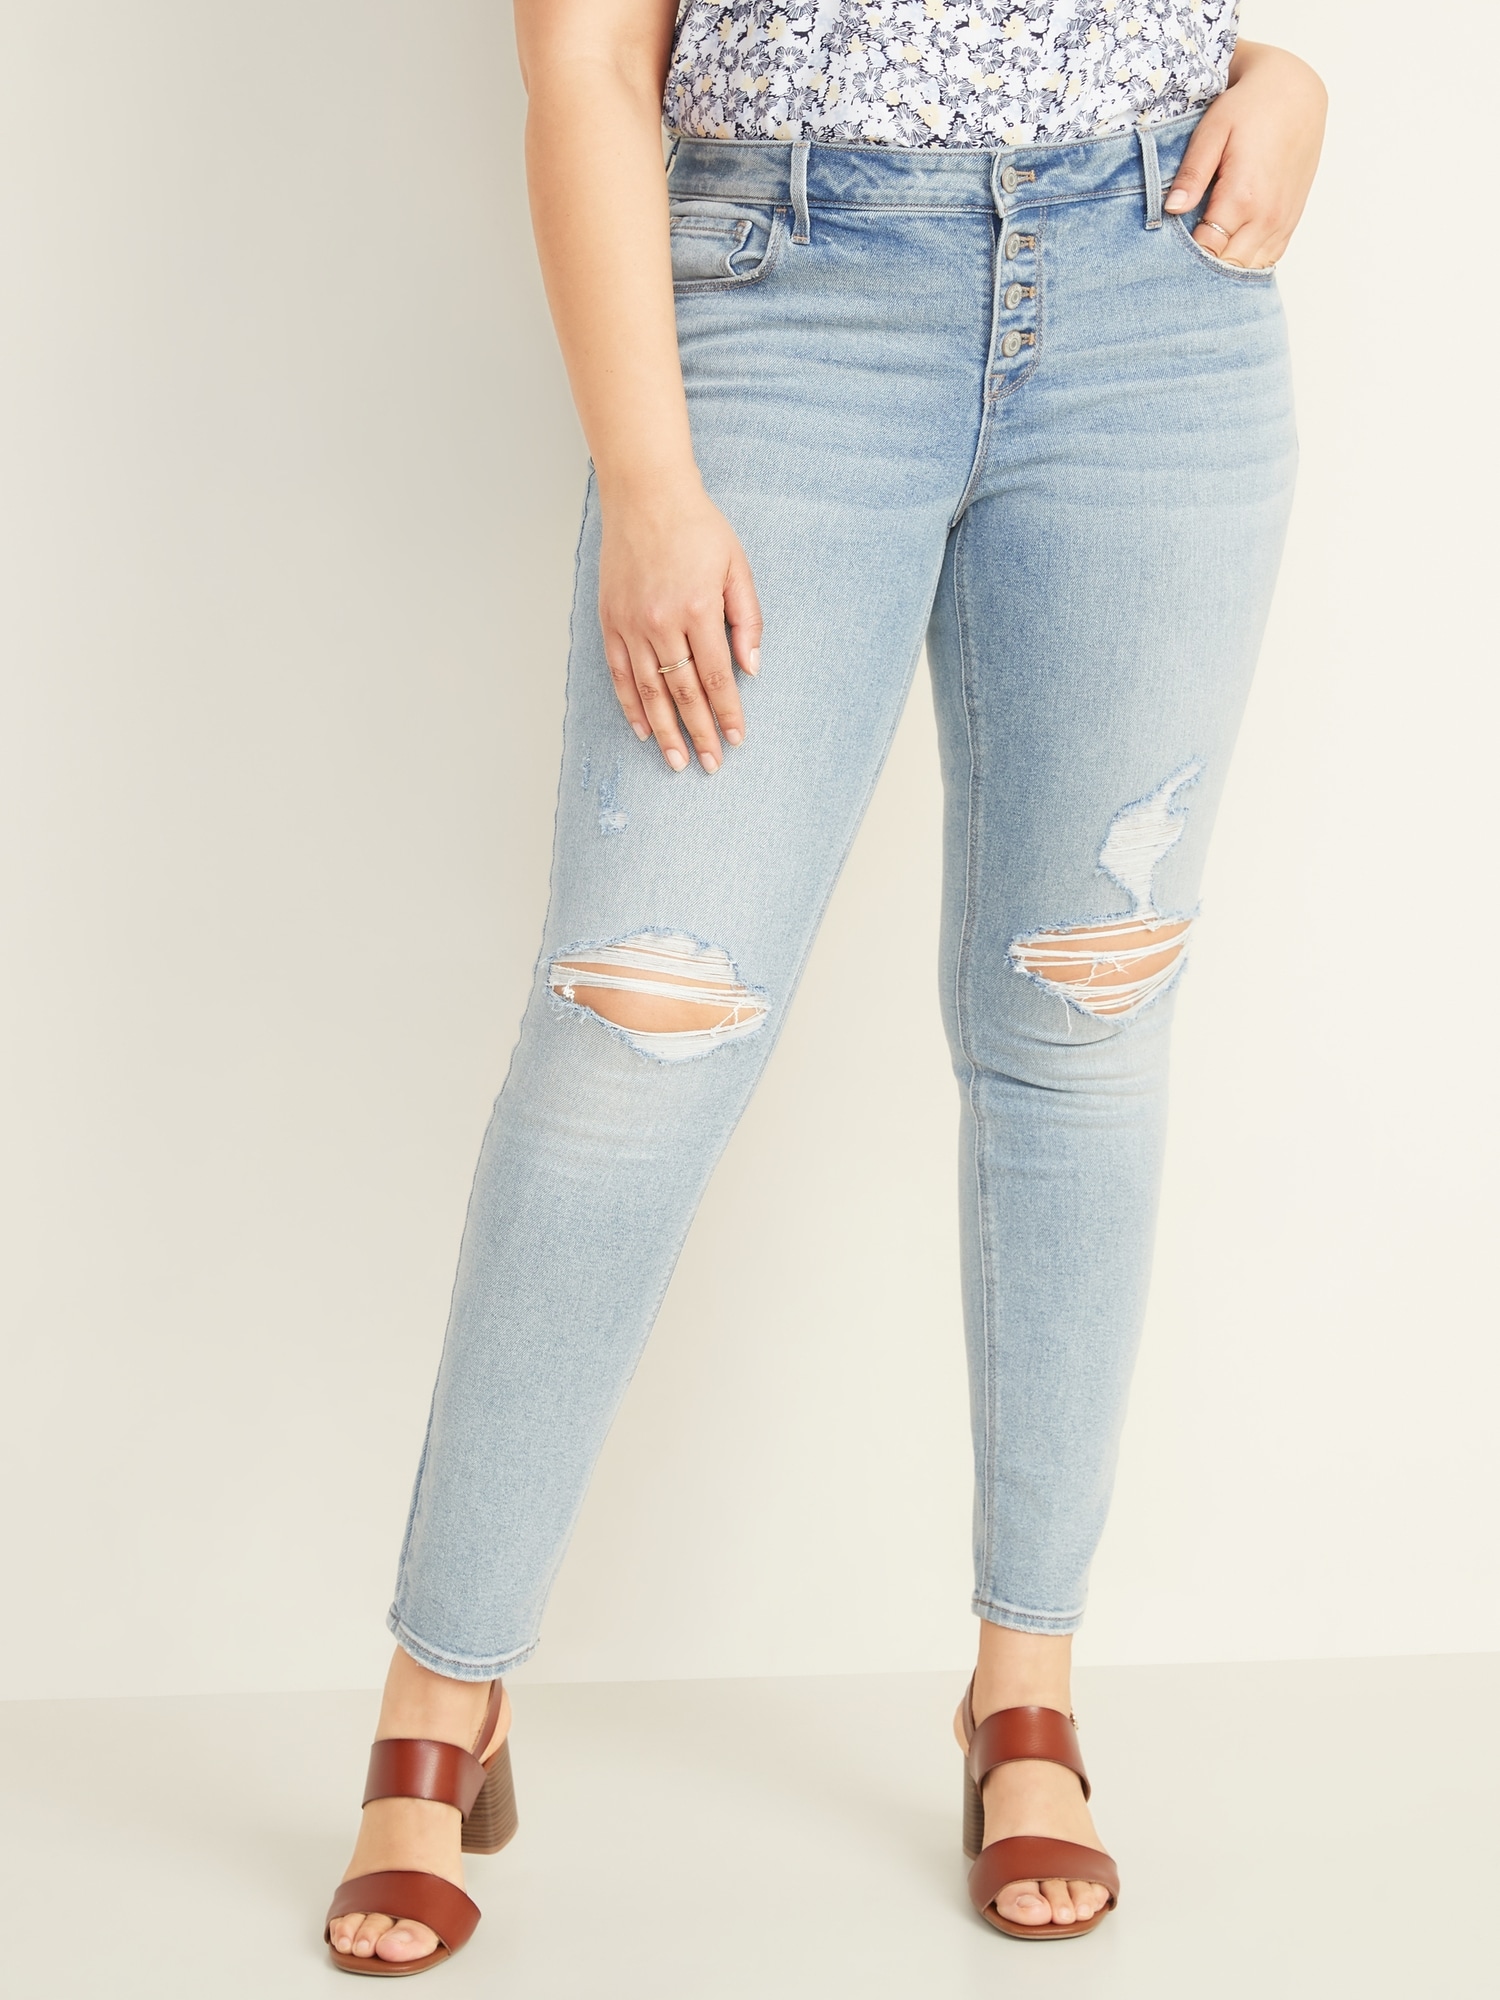 old navy low rise jeans